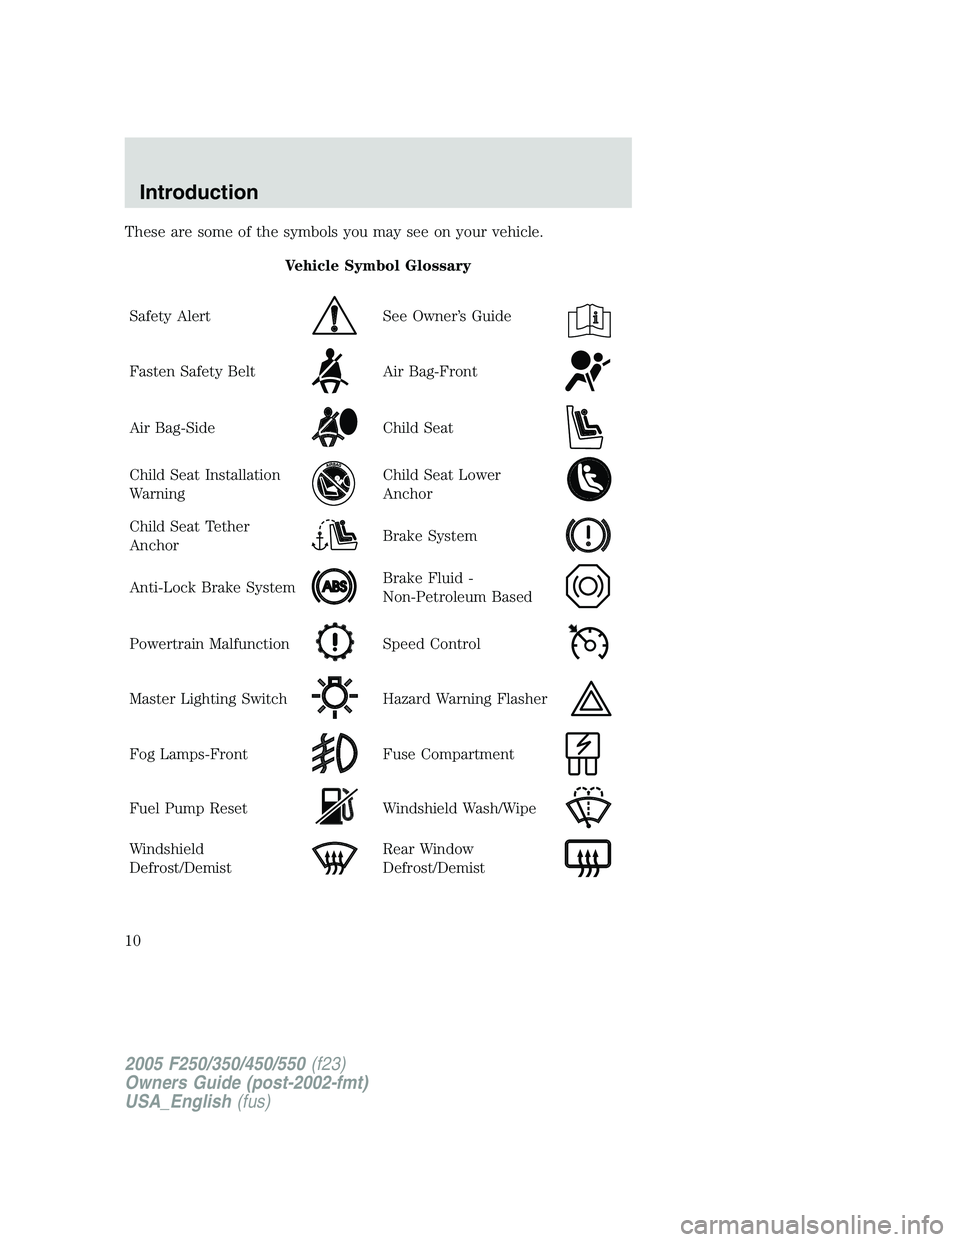 FORD F250 SUPER DUTY 2005  Owners Manual These are some of the symbols you may see on your vehicle.
Vehicle Symbol Glossary
Safety Alert See Owner’s Guide
Fasten Safety Belt Air Bag-Front
Air Bag-Side Child Seat
Child Seat Installation
War